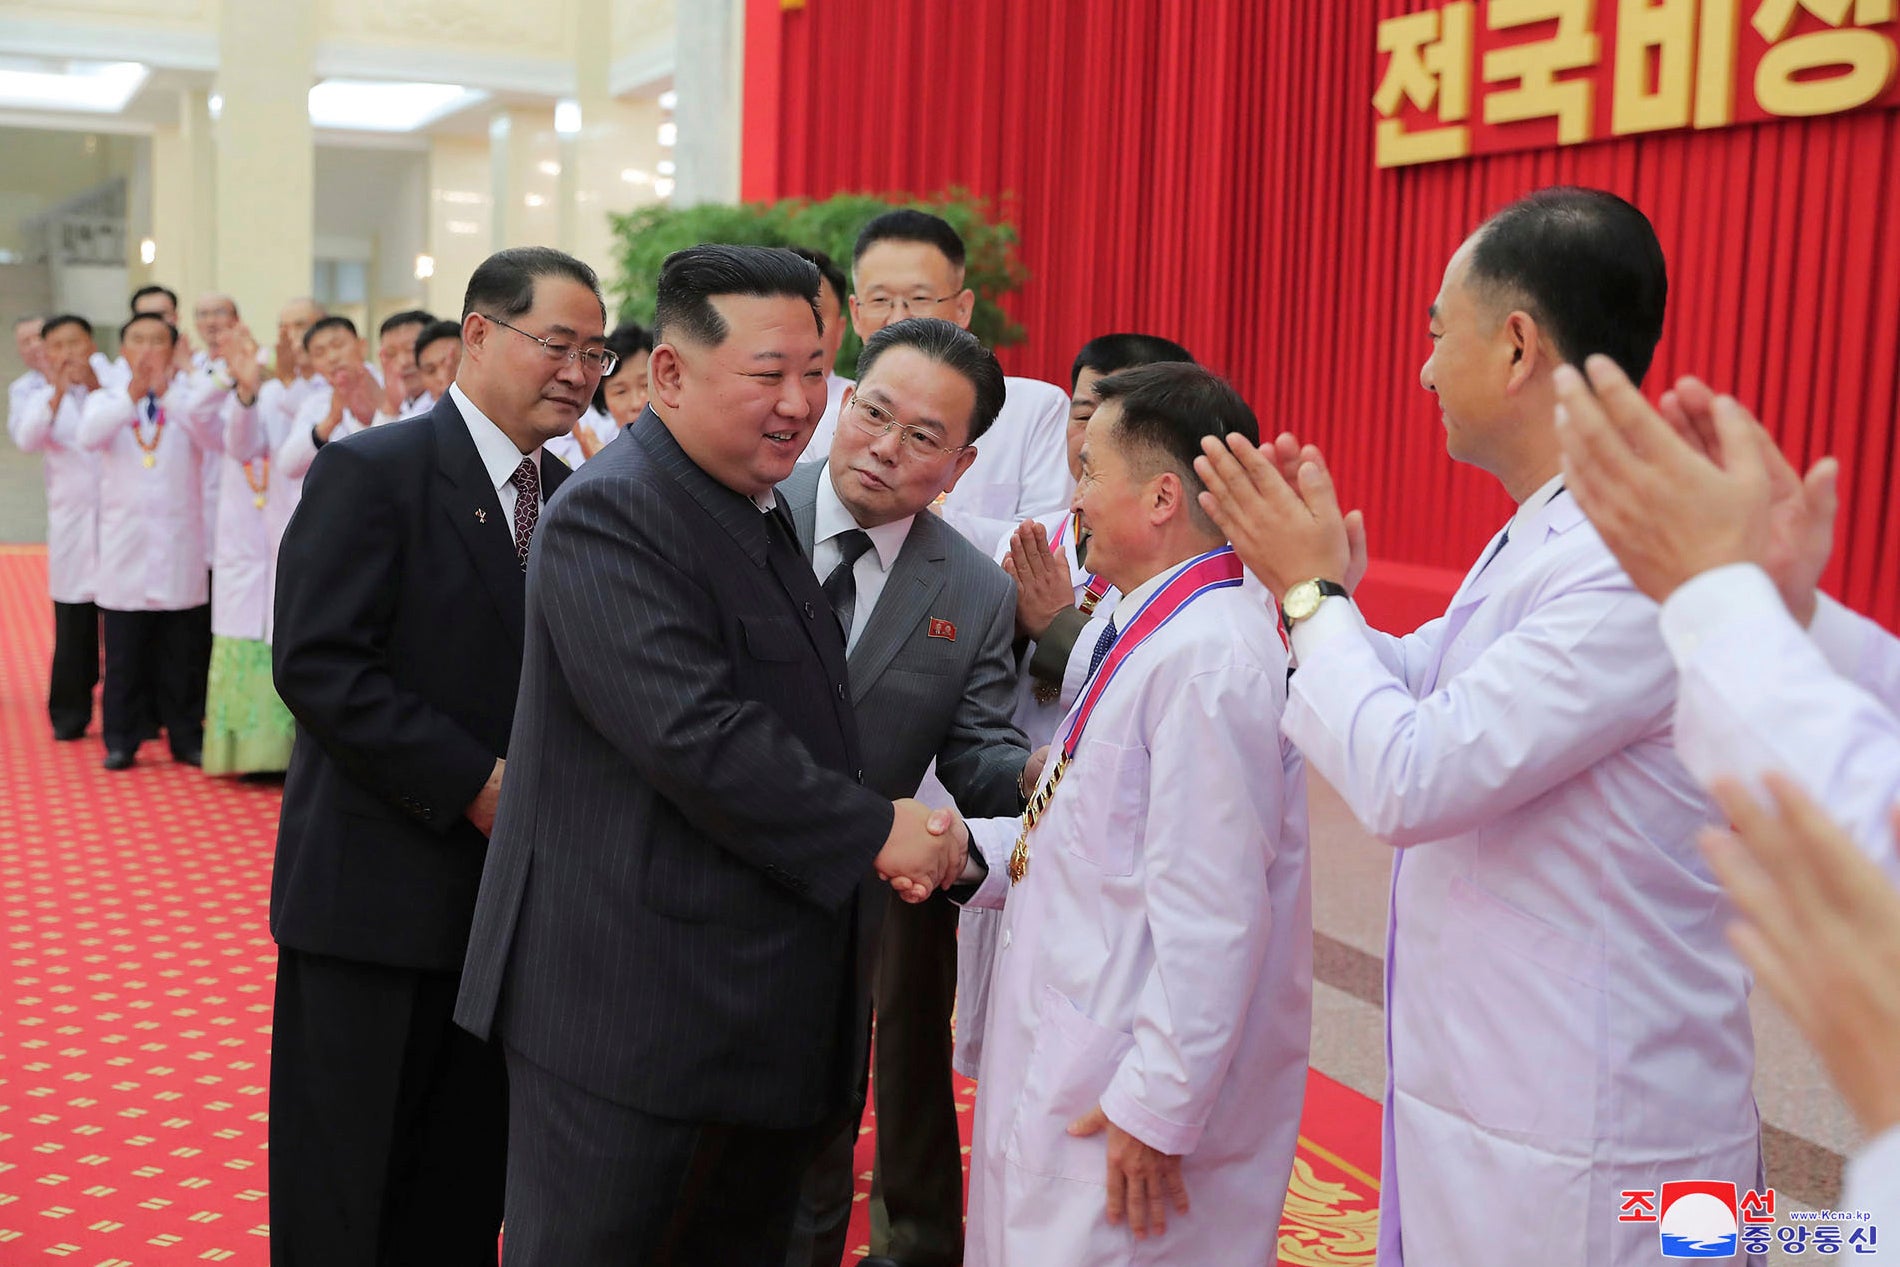 In this photo provided by the North Korean government, North Korean leader Kim Jong-un shakes hands with a health official in Pyongyang, North Korea, Wednesday, Aug. 10, 2022. Kim declared victory over Covid-19 and ordered an easing of preventive measures